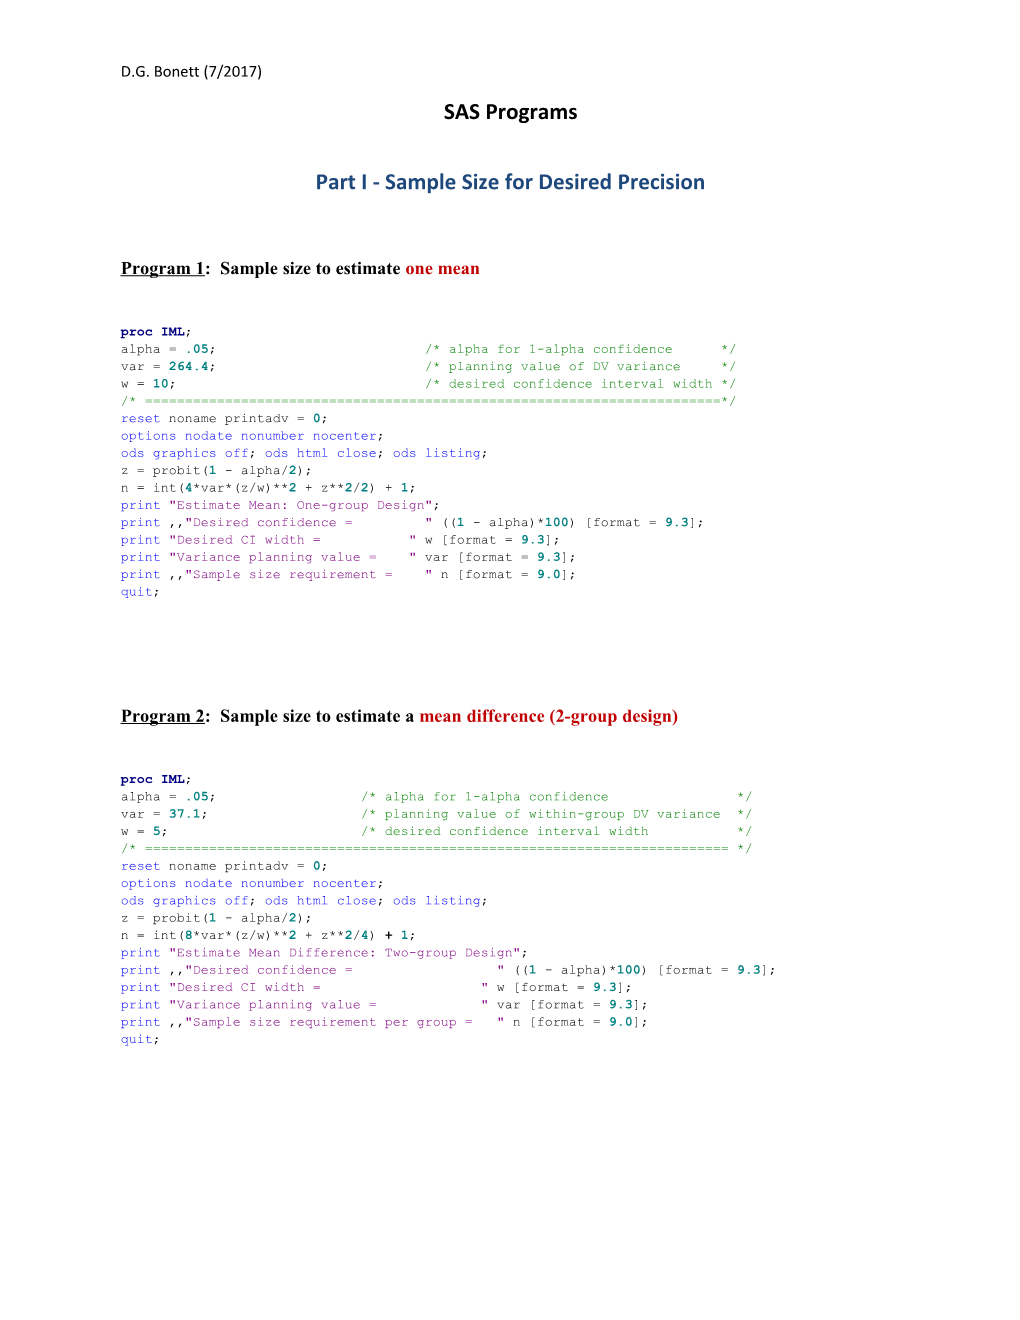 Part I - Sample Size for Desired Precision